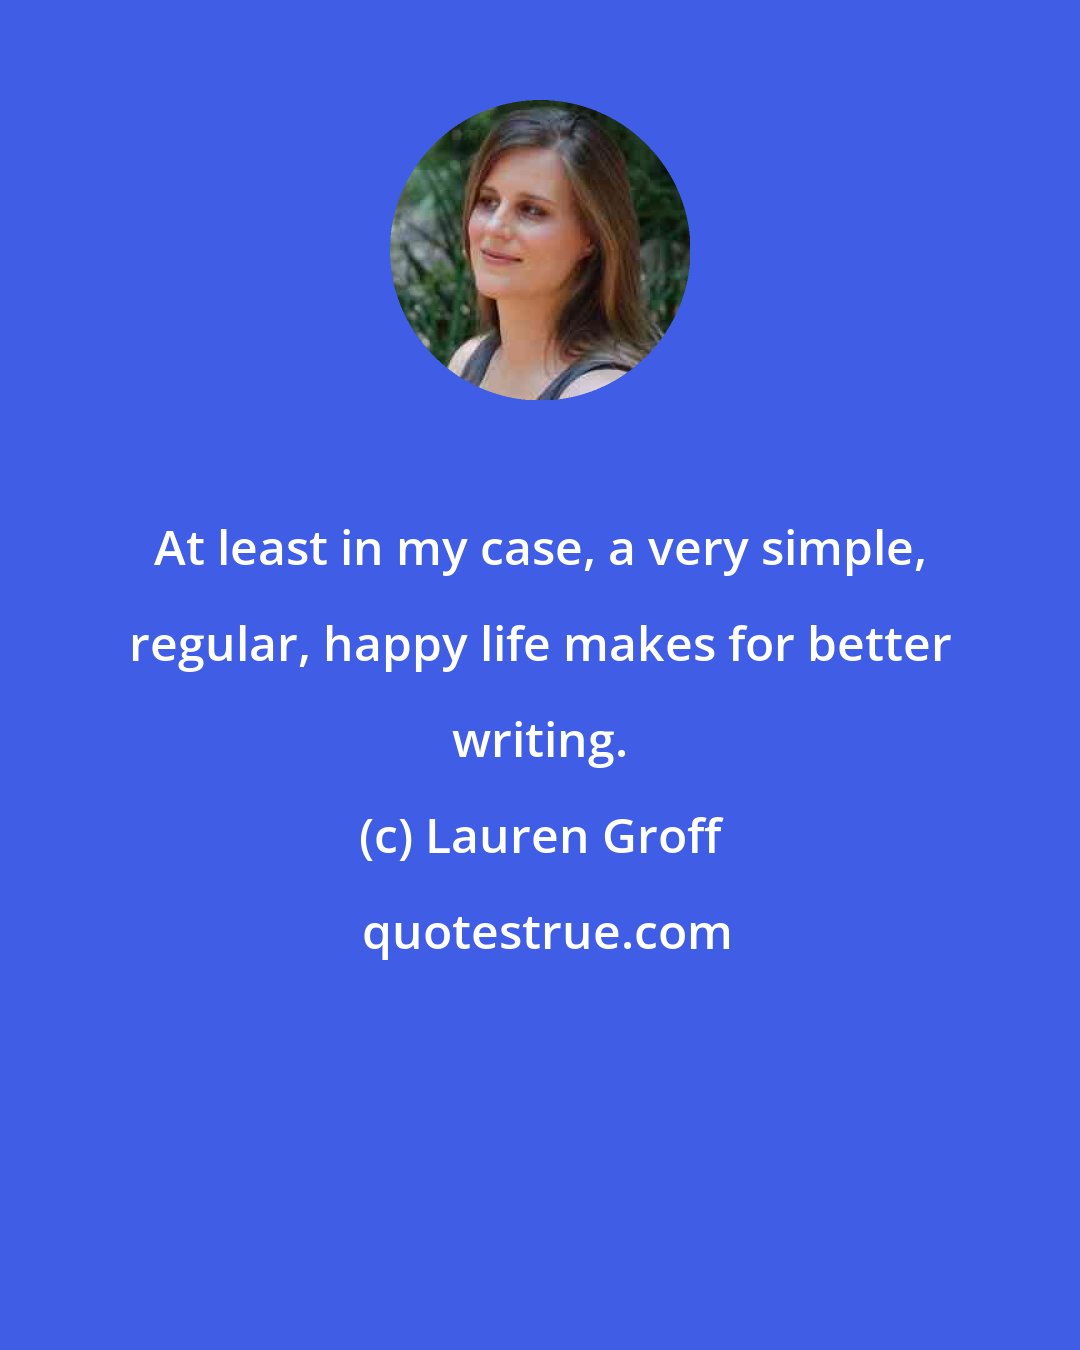 Lauren Groff: At least in my case, a very simple, regular, happy life makes for better writing.